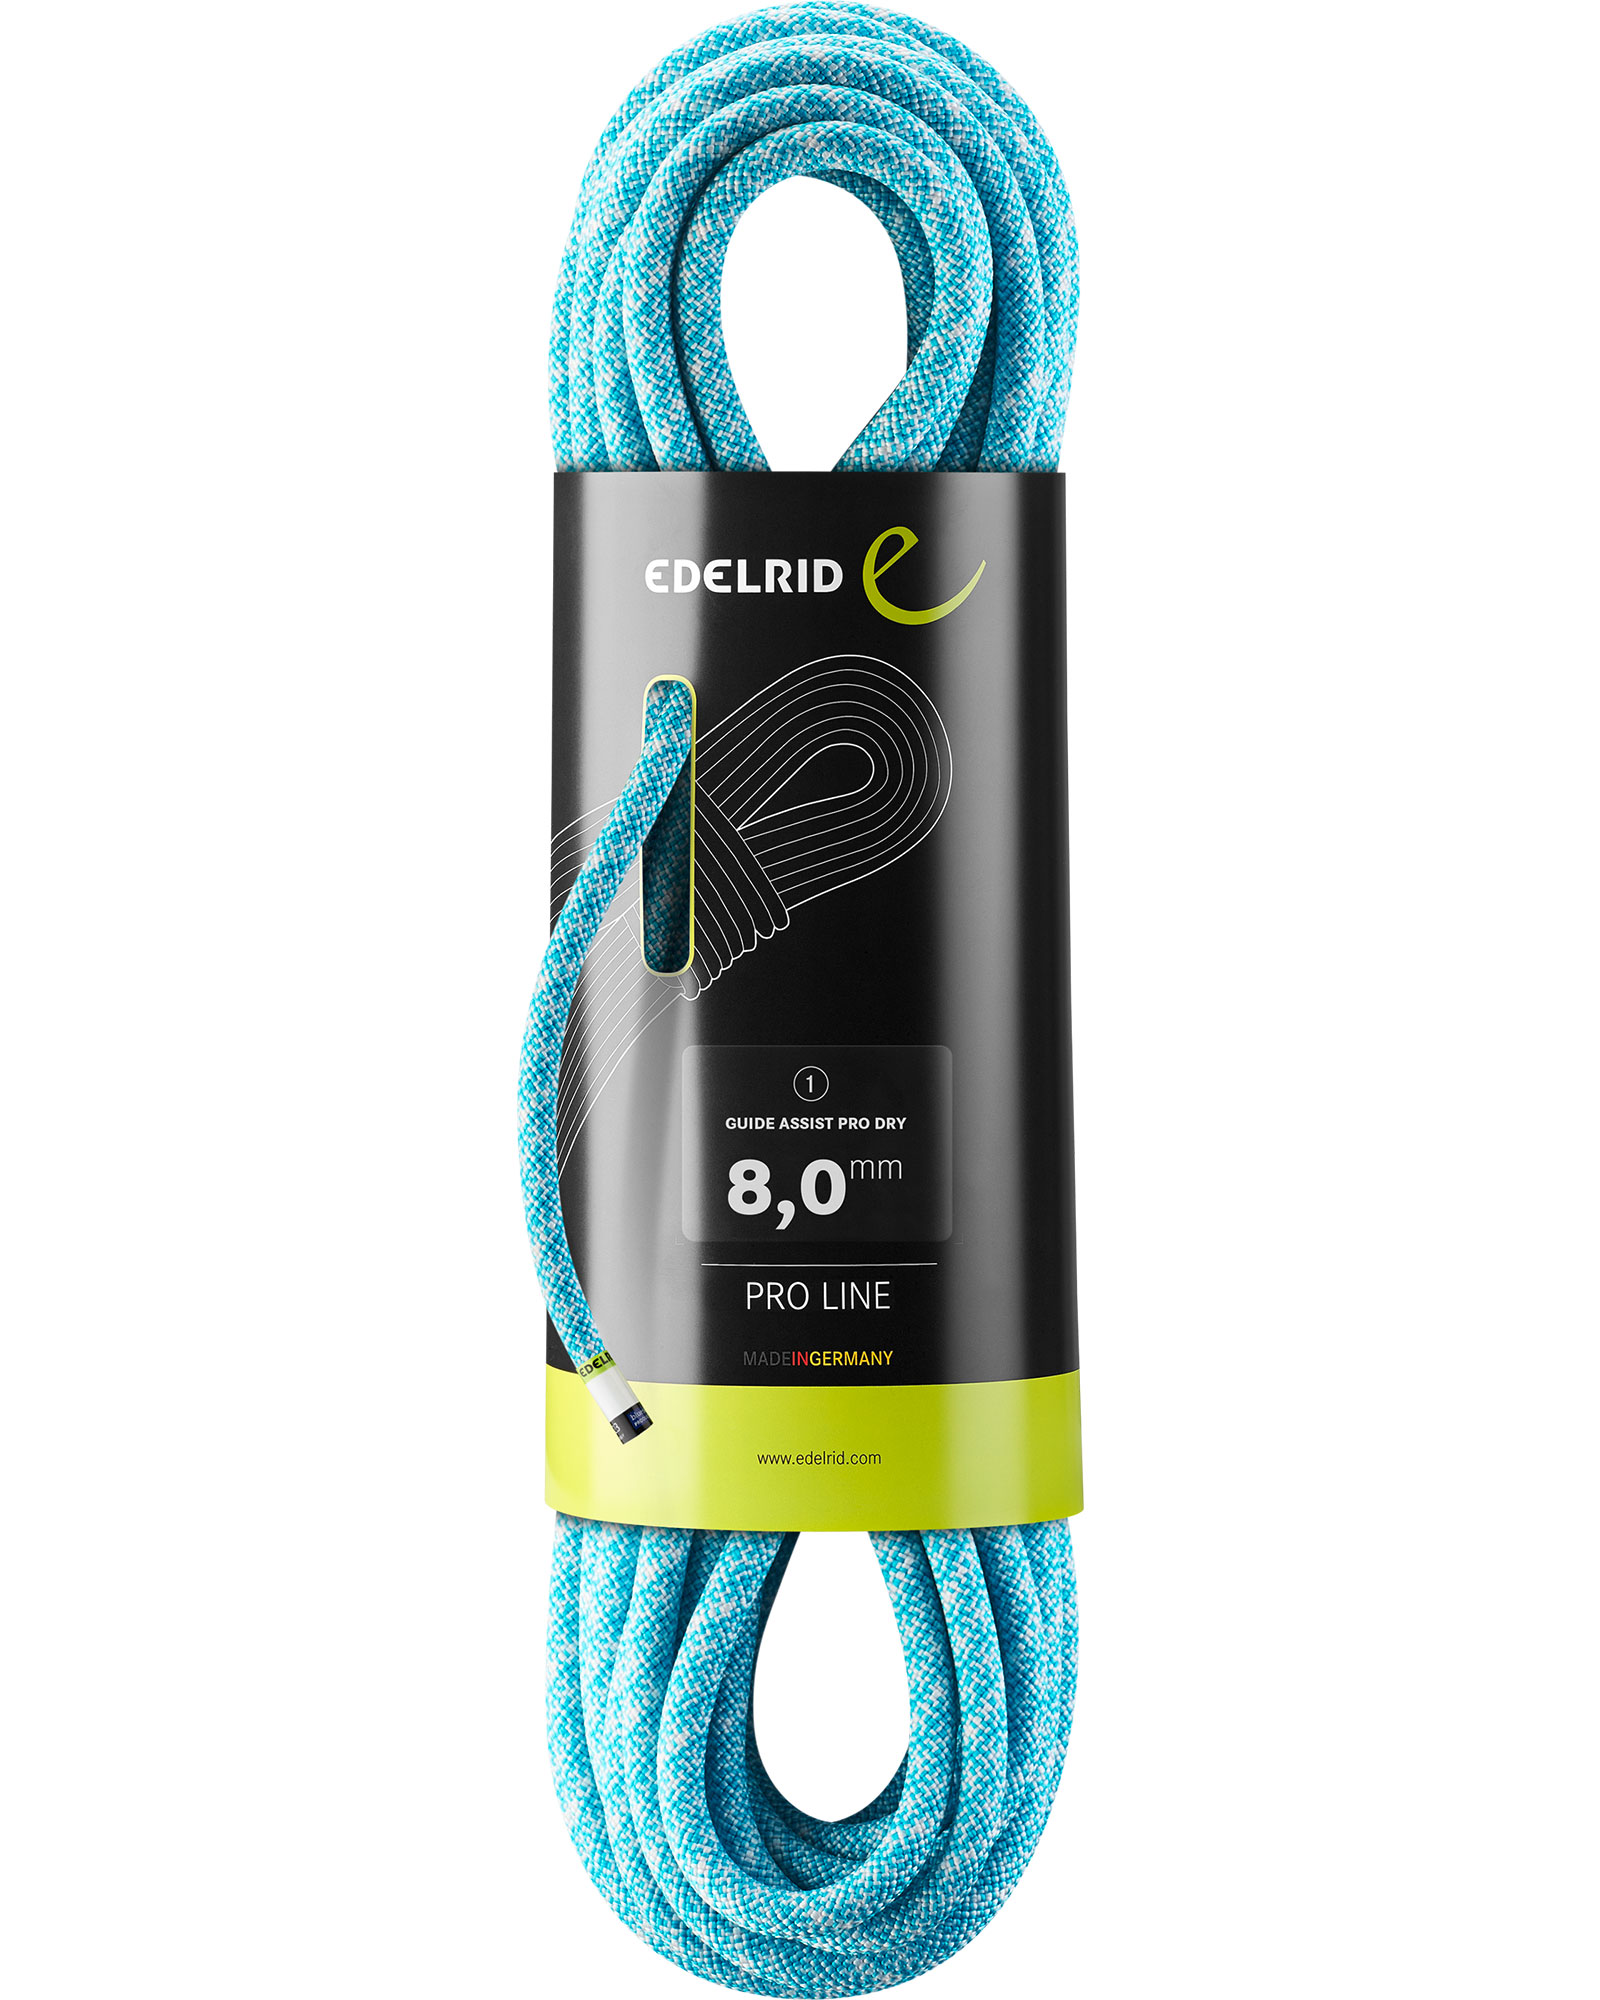 Edelrid Guide Assist Pro Dry 8.0 x 30 Rope - Icemint 30m